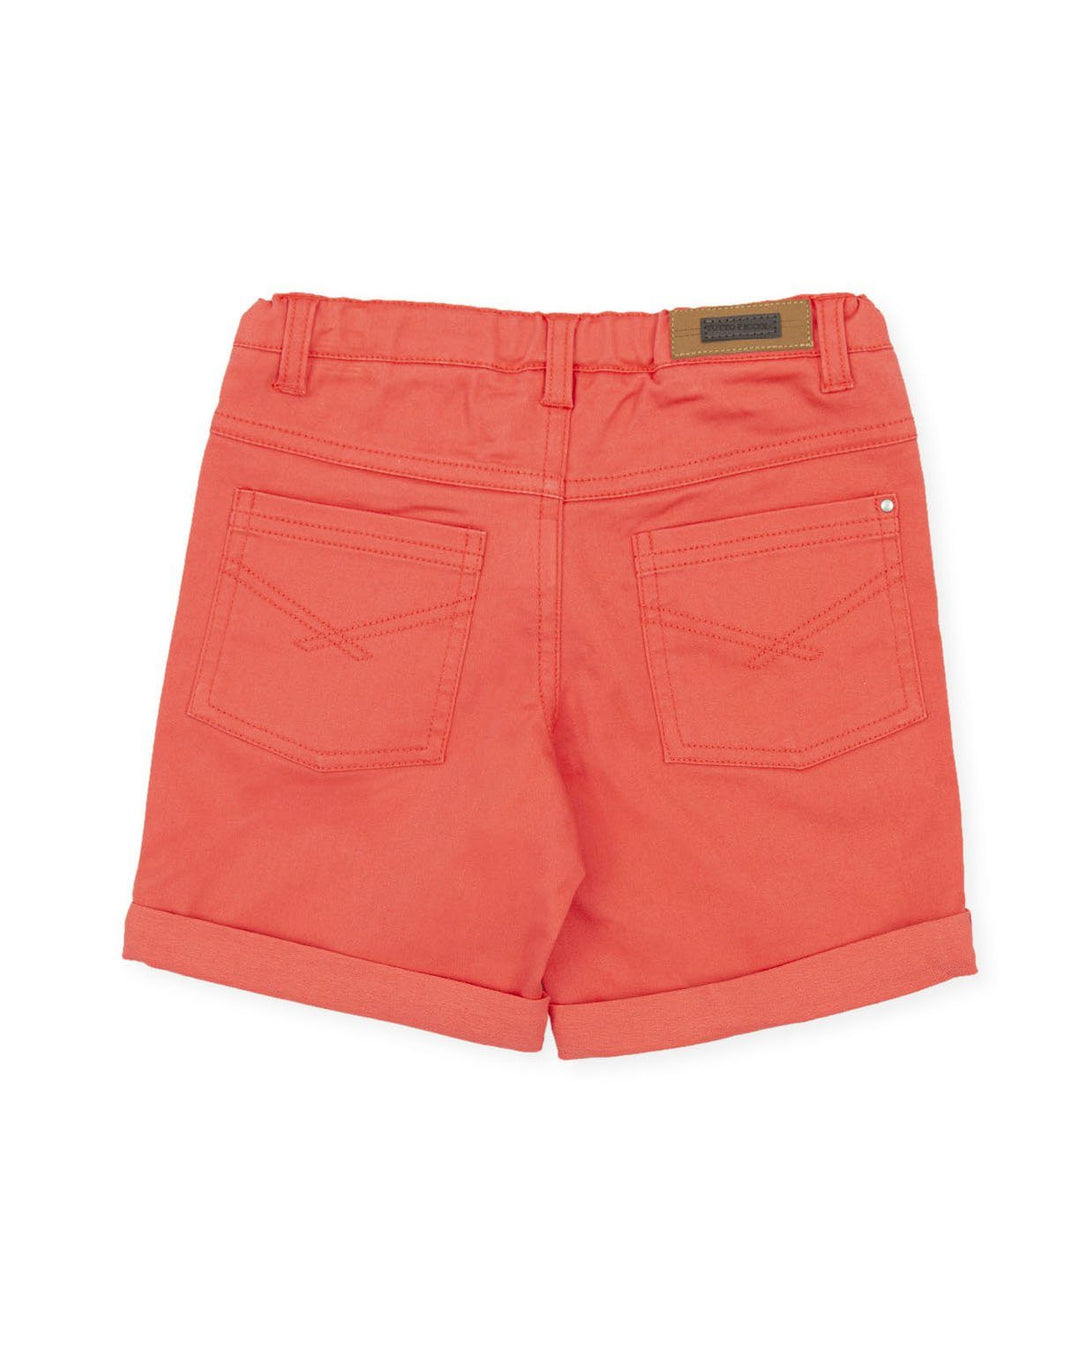 Tutto Piccolo "Grayson" Green Palm Leaf Polo Shirt & Shorts | Millie and John